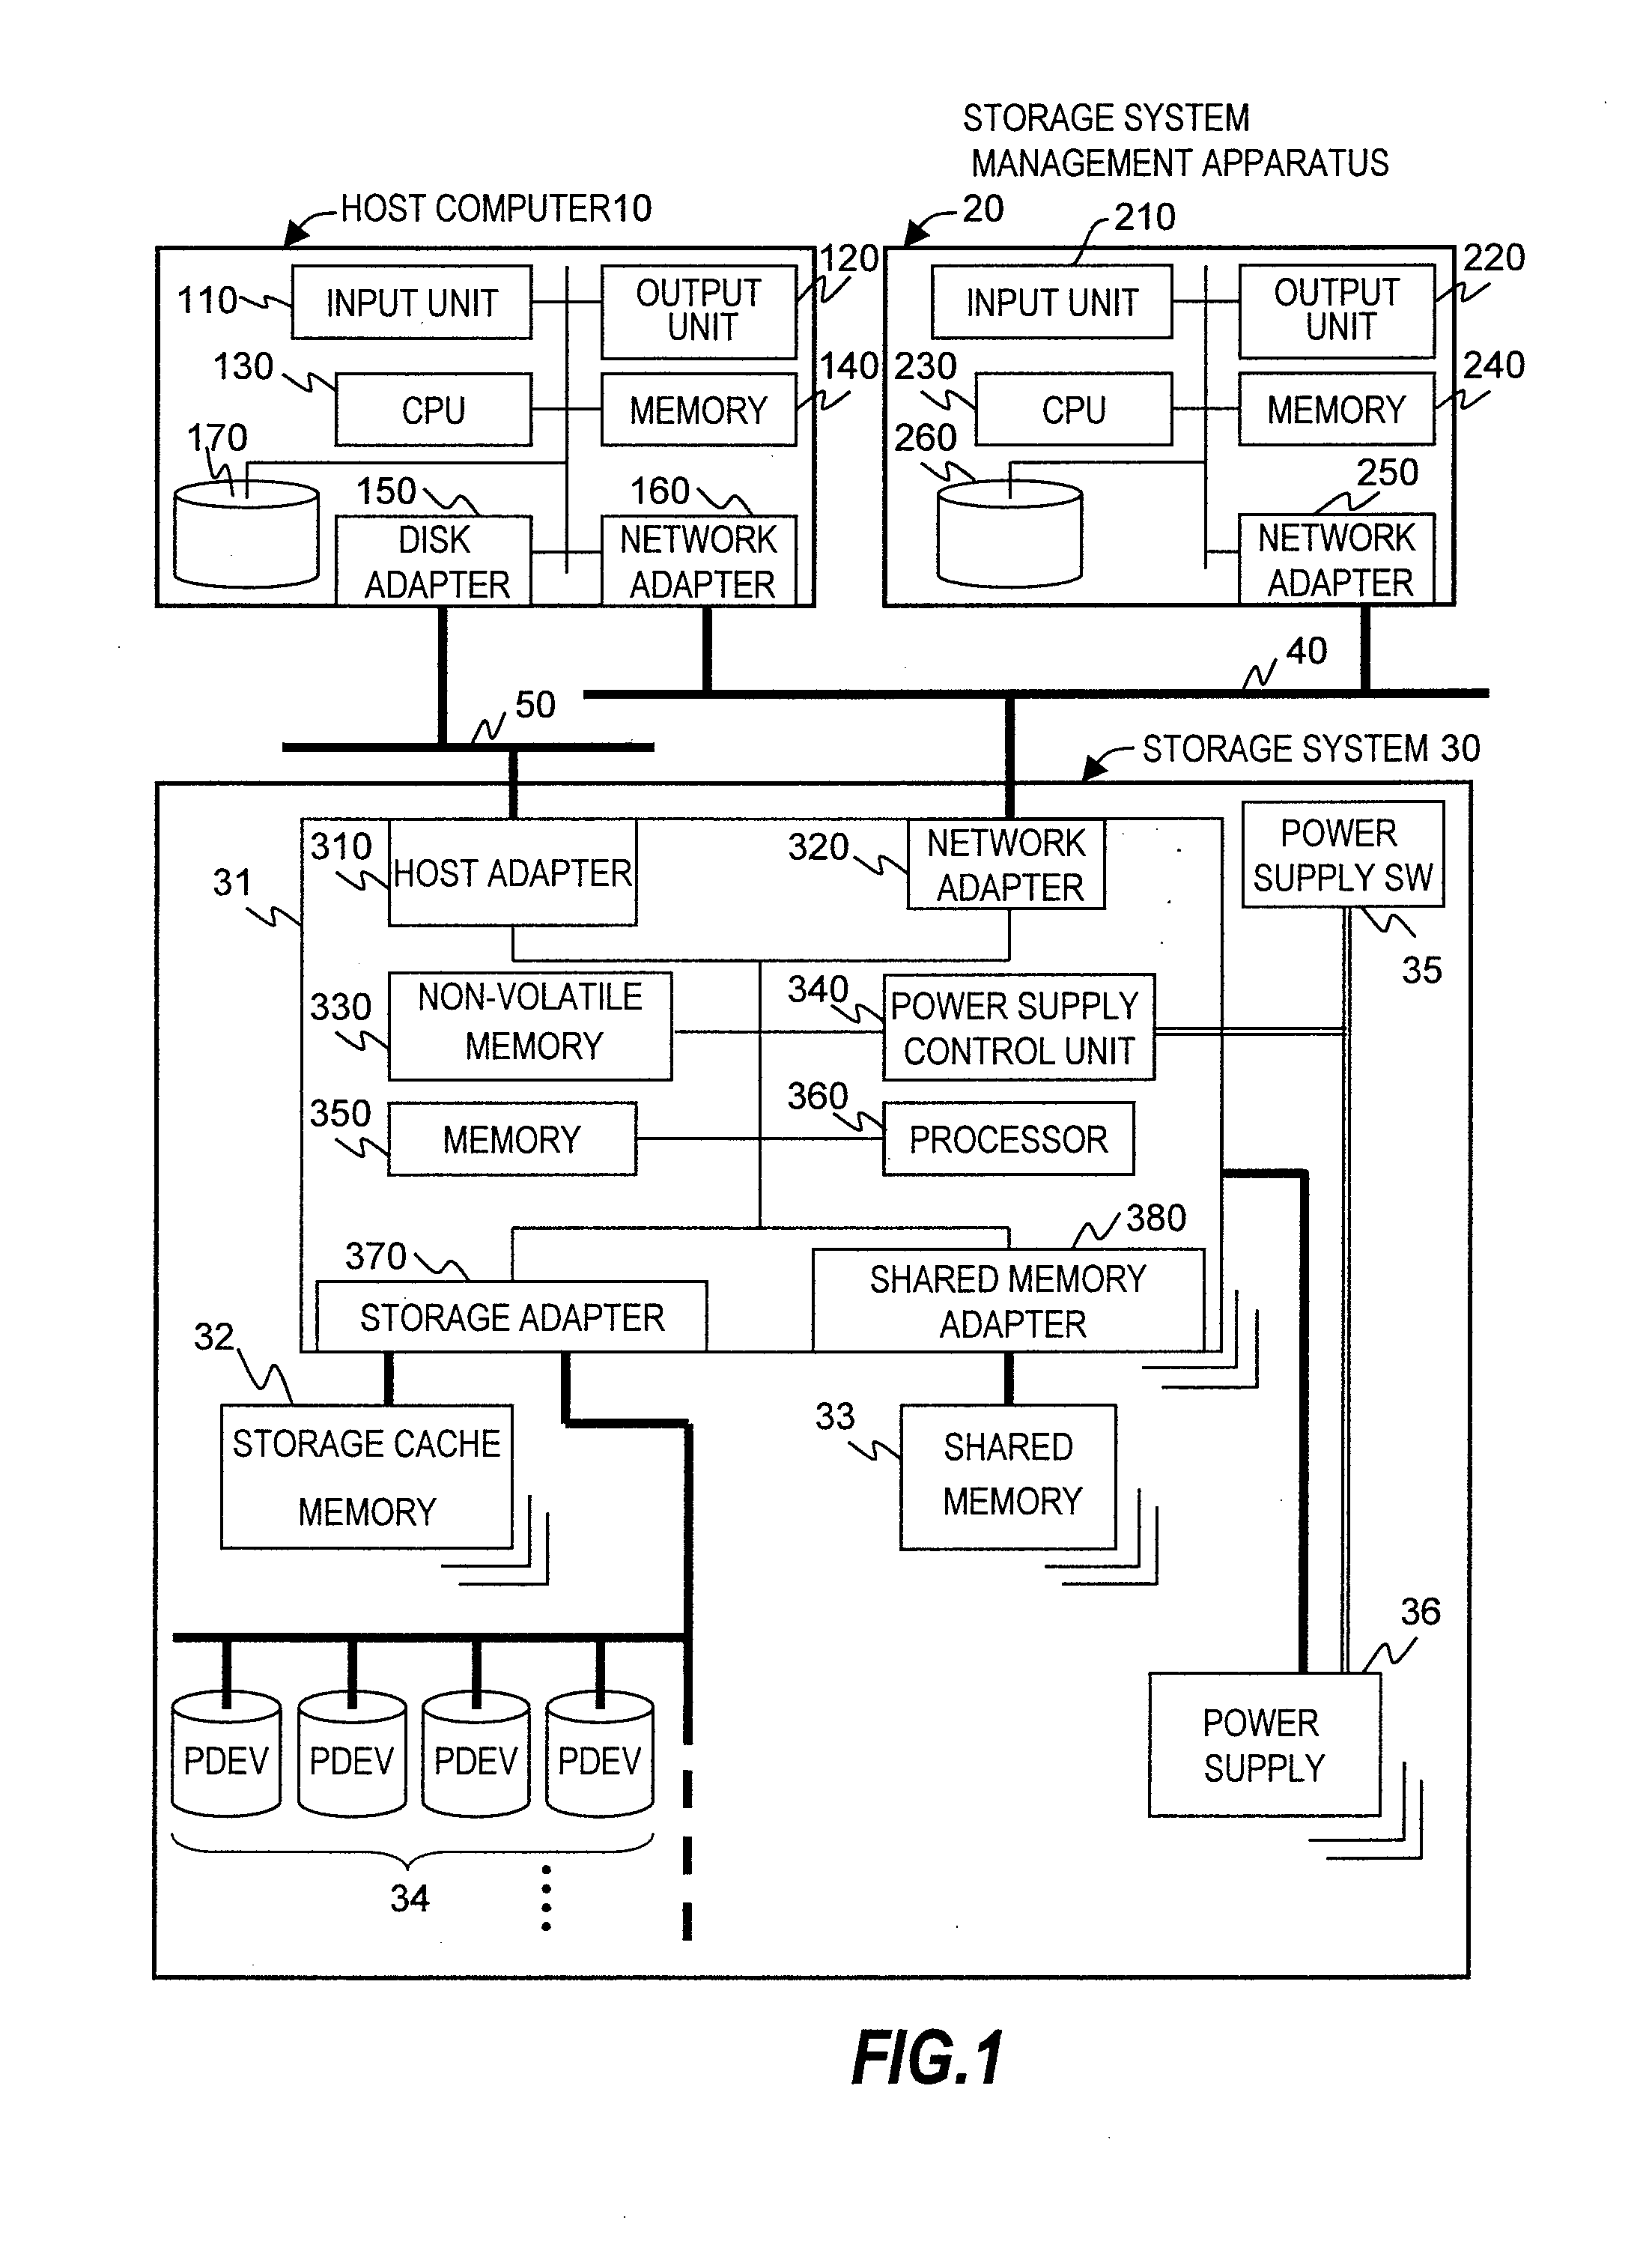 Storage system for a storage pool and virtual volumes